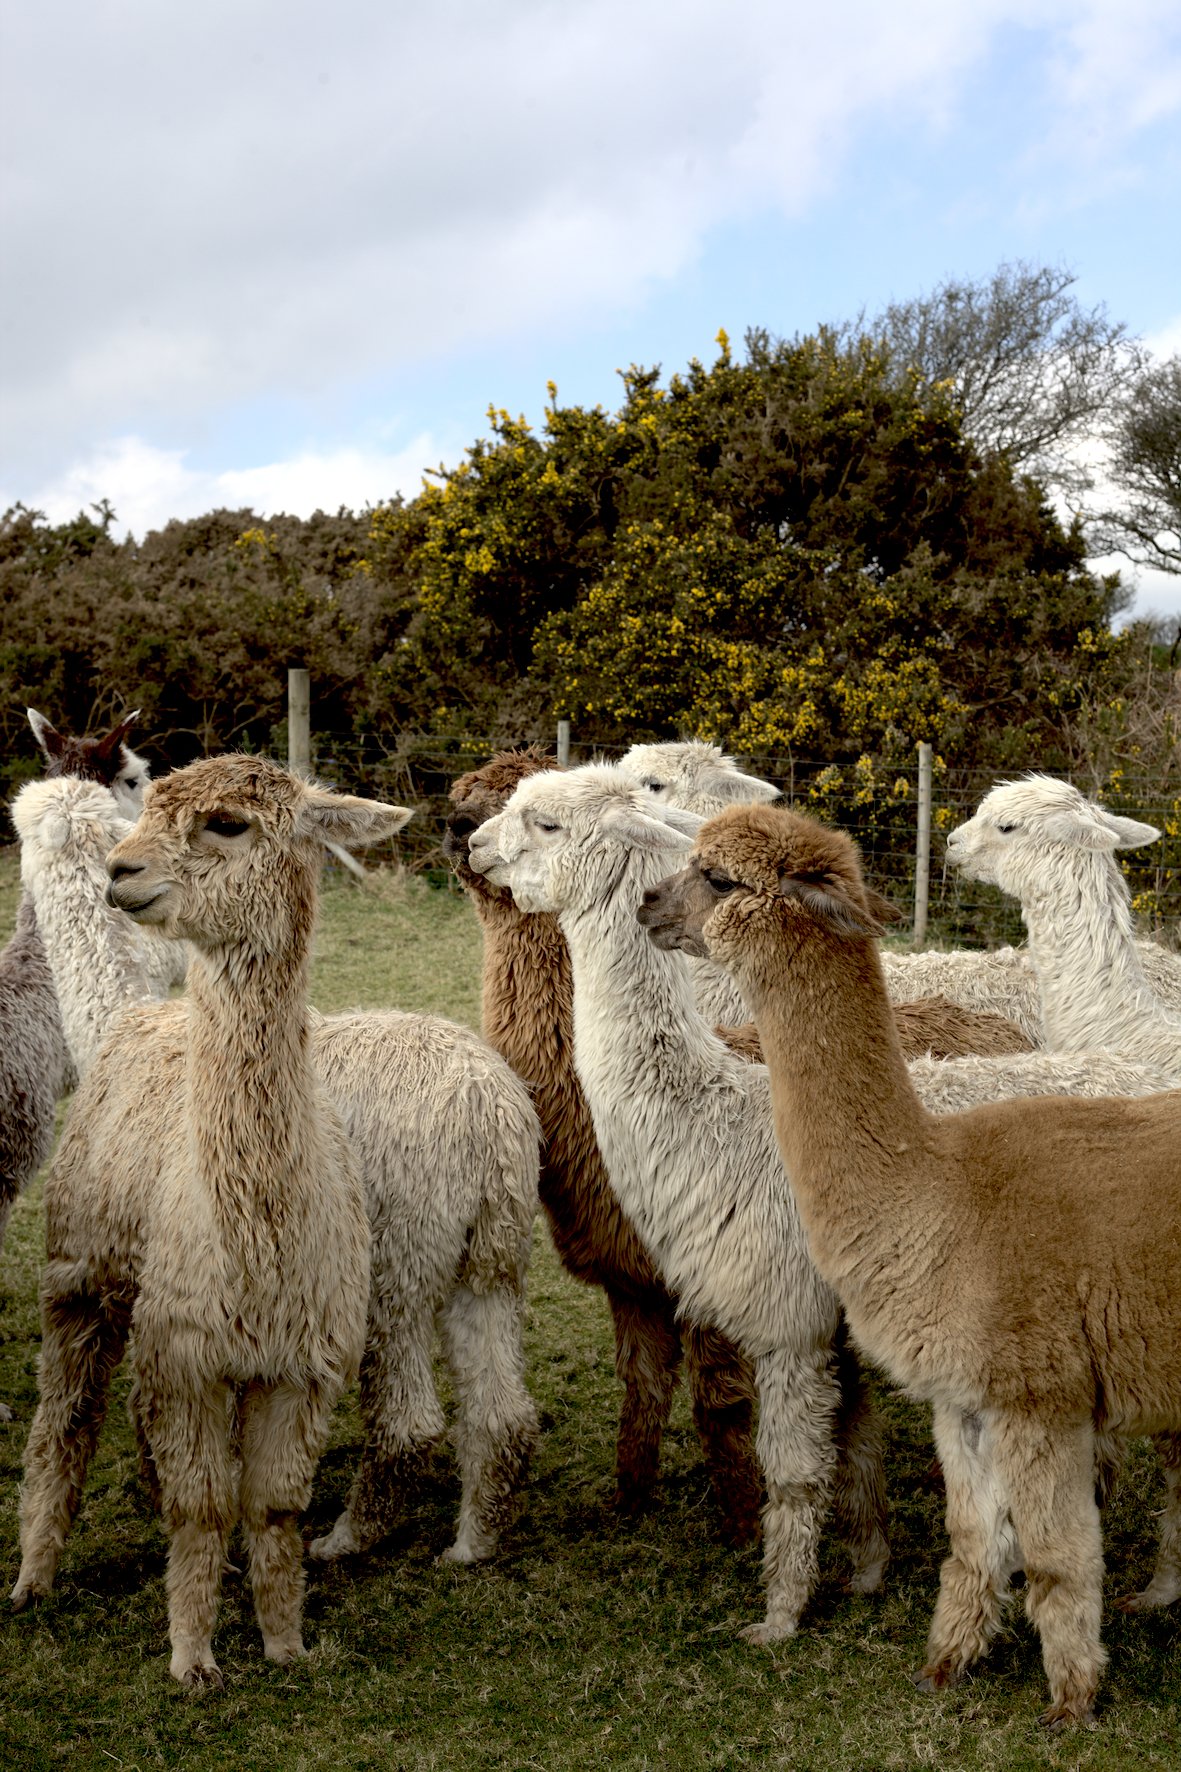 A photograph by Hatty Frances Bell of Lama's on the farm at Dark Sky taken for Fibreshed South West